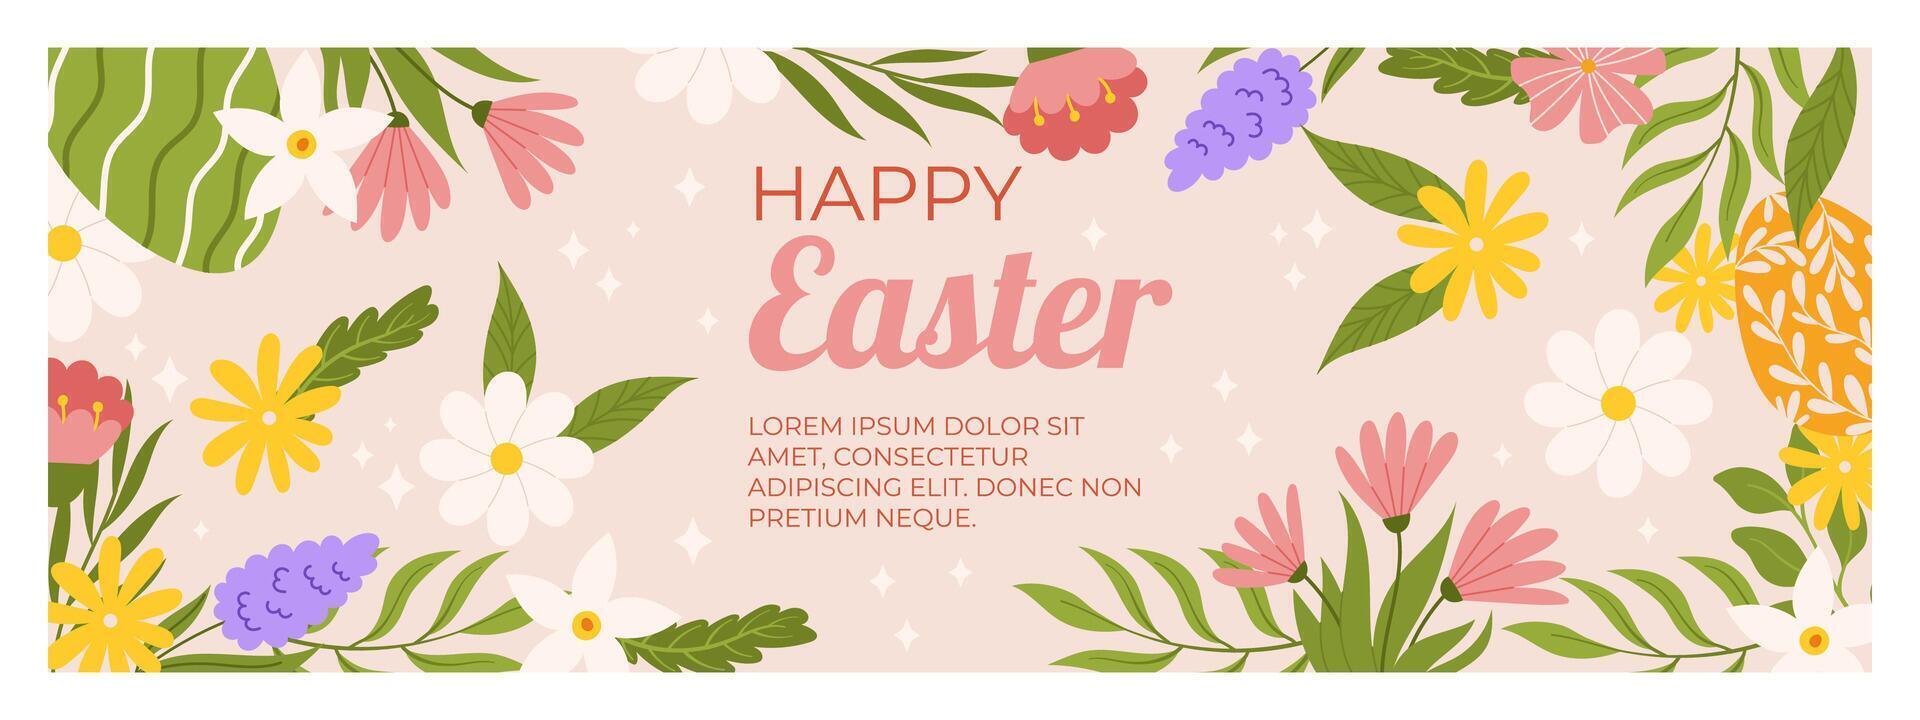 Happy Easter horizontal banner template. Design with  painted eggs, flowers and leaves around vector